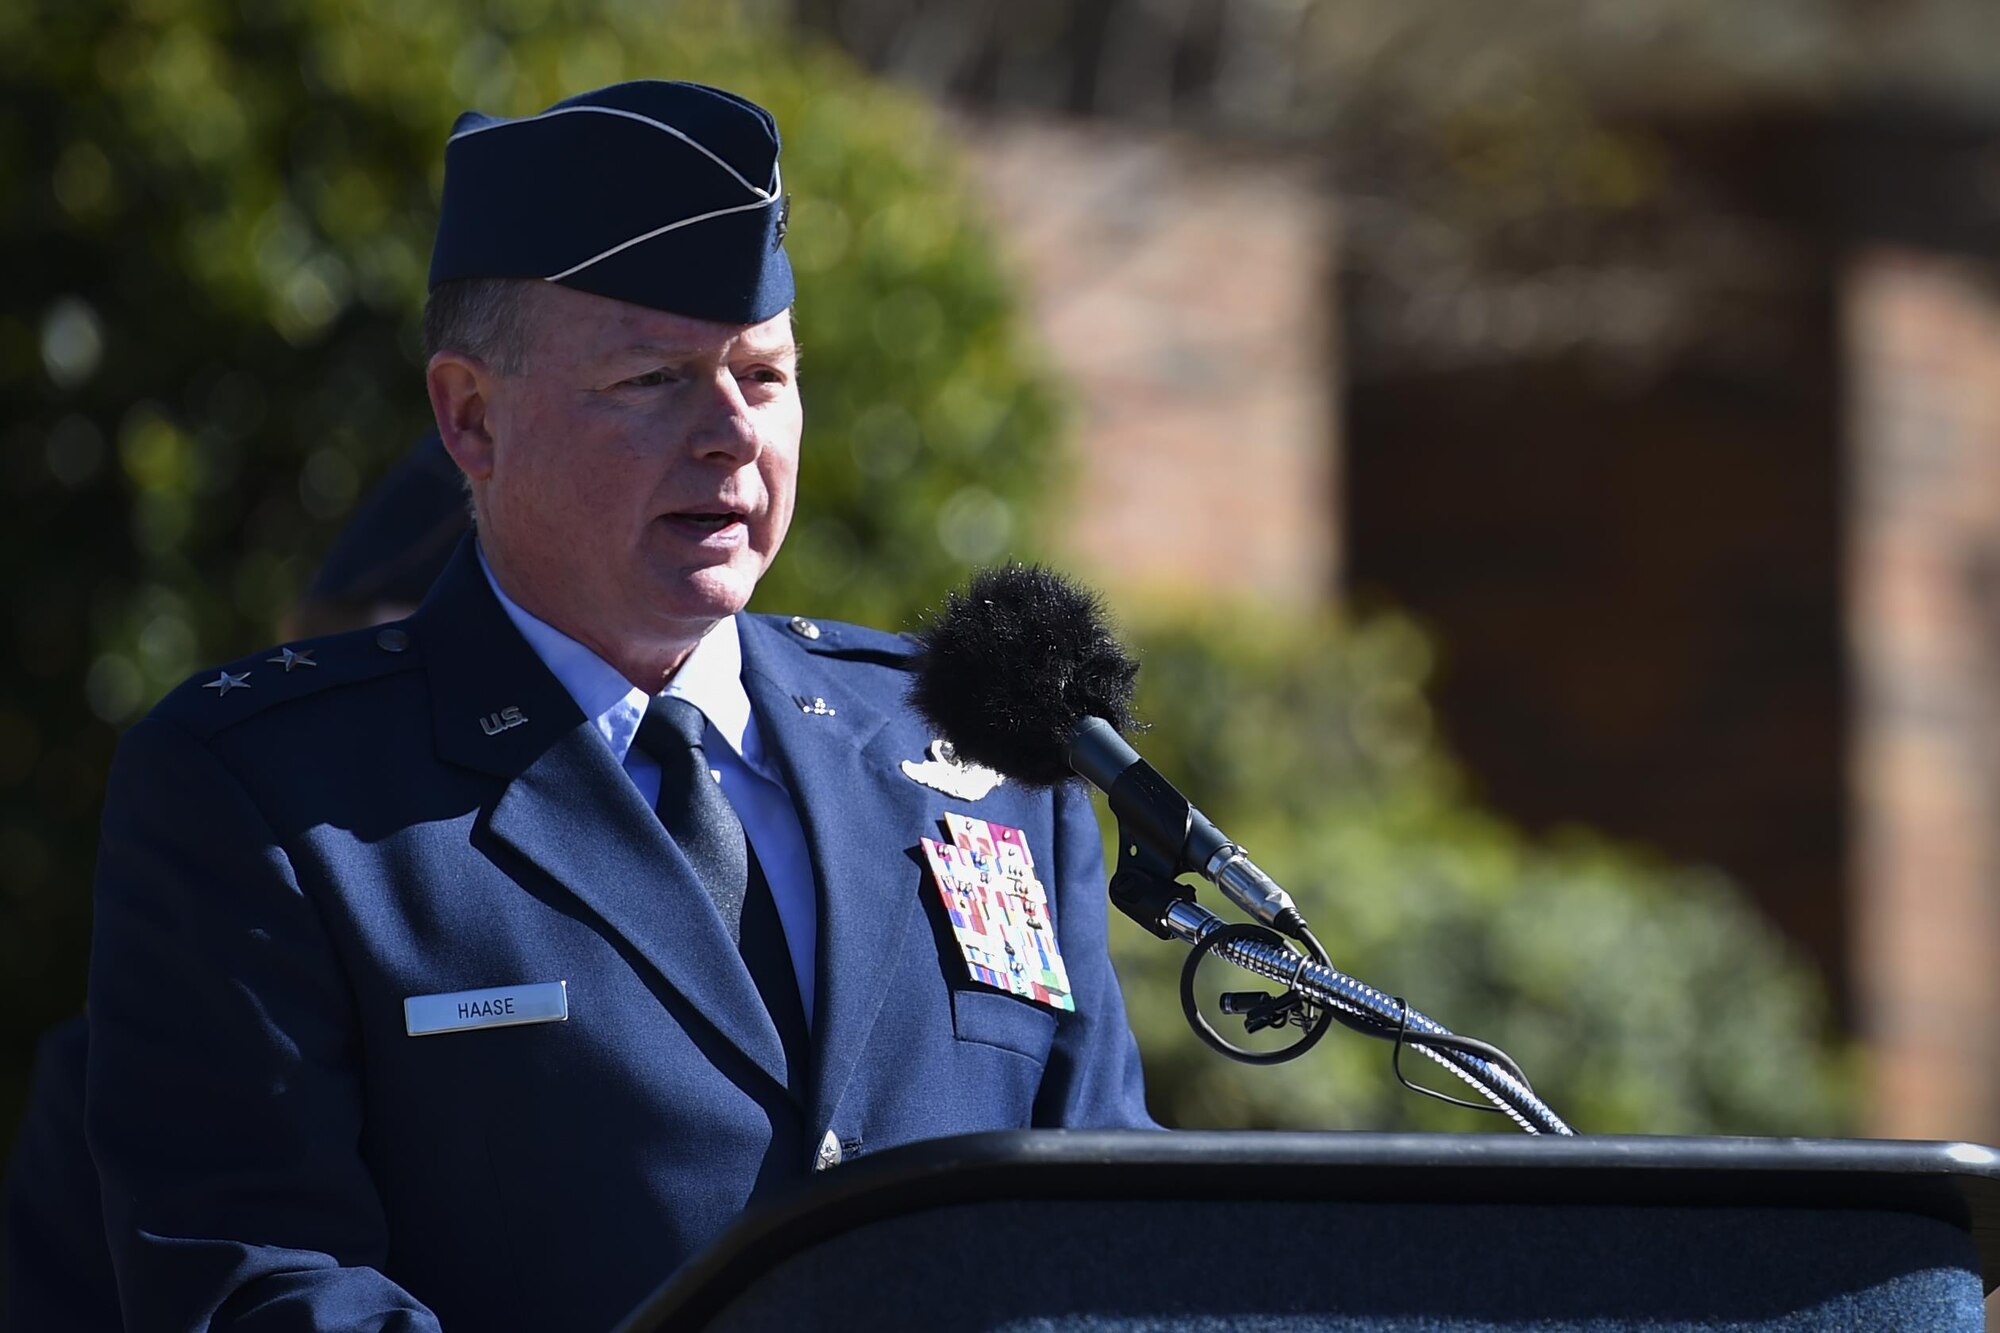 Maj. Gen. Eugene Haase, the vice commander of Air Force Special Operations Command, speaks during the Ratchet 33 Memorial Ceremony at the air park, Hurlburt Field, Fla., Feb. 16, 2017. Ratchet 33 was a U-28A intelligence, surveillance, reconnaissance aircraft crewed by four Air Commandos that crashed in Djibouti, Africa, Feb. 18, 2012. The aircrew was comprised of Capt. Ryan Hall, Capt. Nicholas Whitlock, 1st Lt. Justin Wilkens and Senior Airman Julian Scholten. (U.S. Air Force photo by Airman 1st Class Joseph Pick)